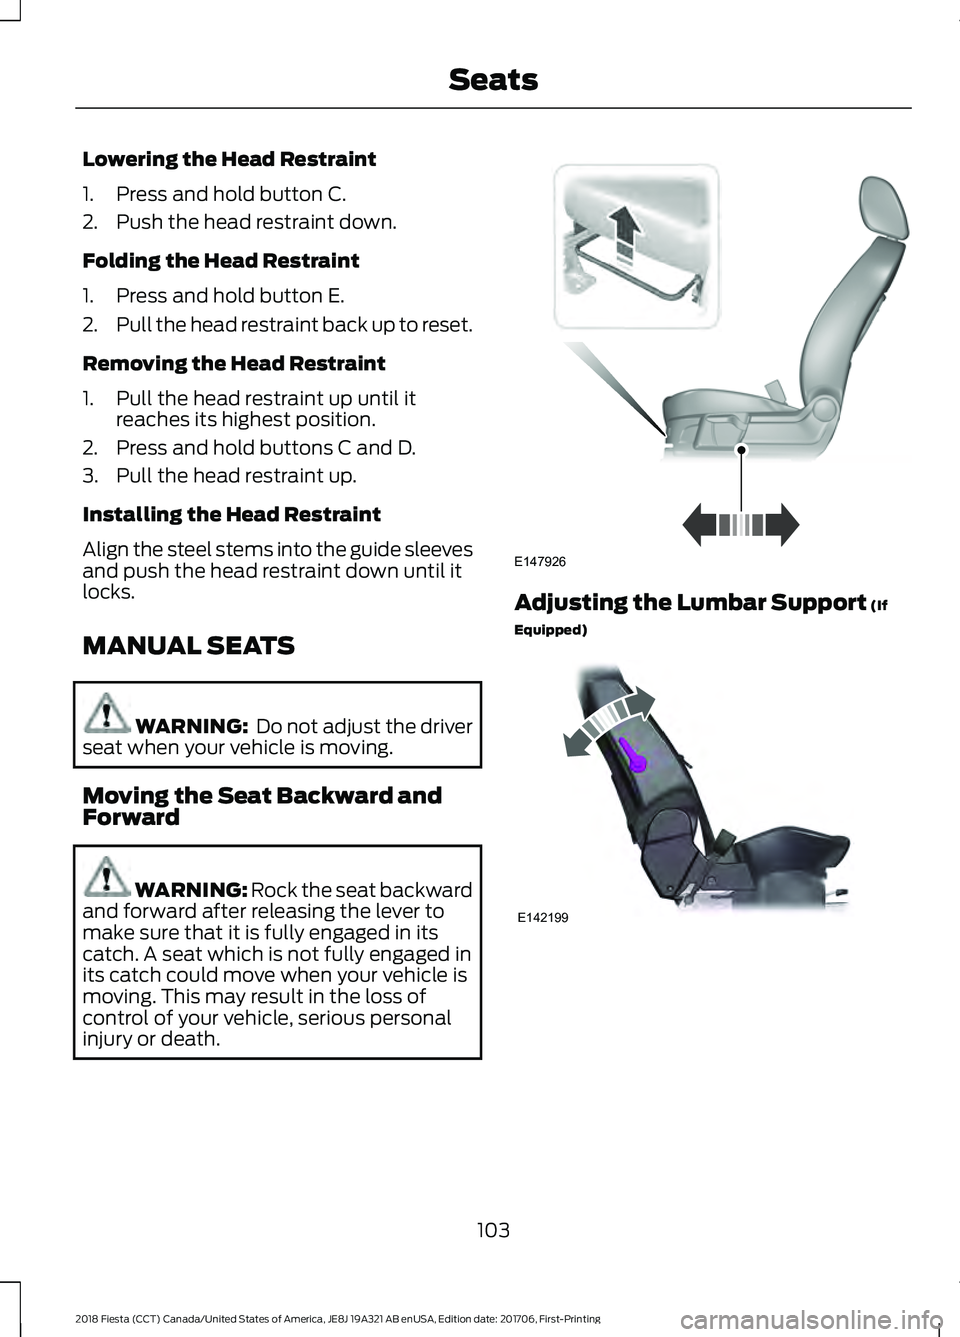 FORD FIESTA 2018  Owners Manual Lowering the Head Restraint
1. Press and hold button C.
2. Push the head restraint down.
Folding the Head Restraint
1. Press and hold button E.
2.
Pull the head restraint back up to reset.
Removing th